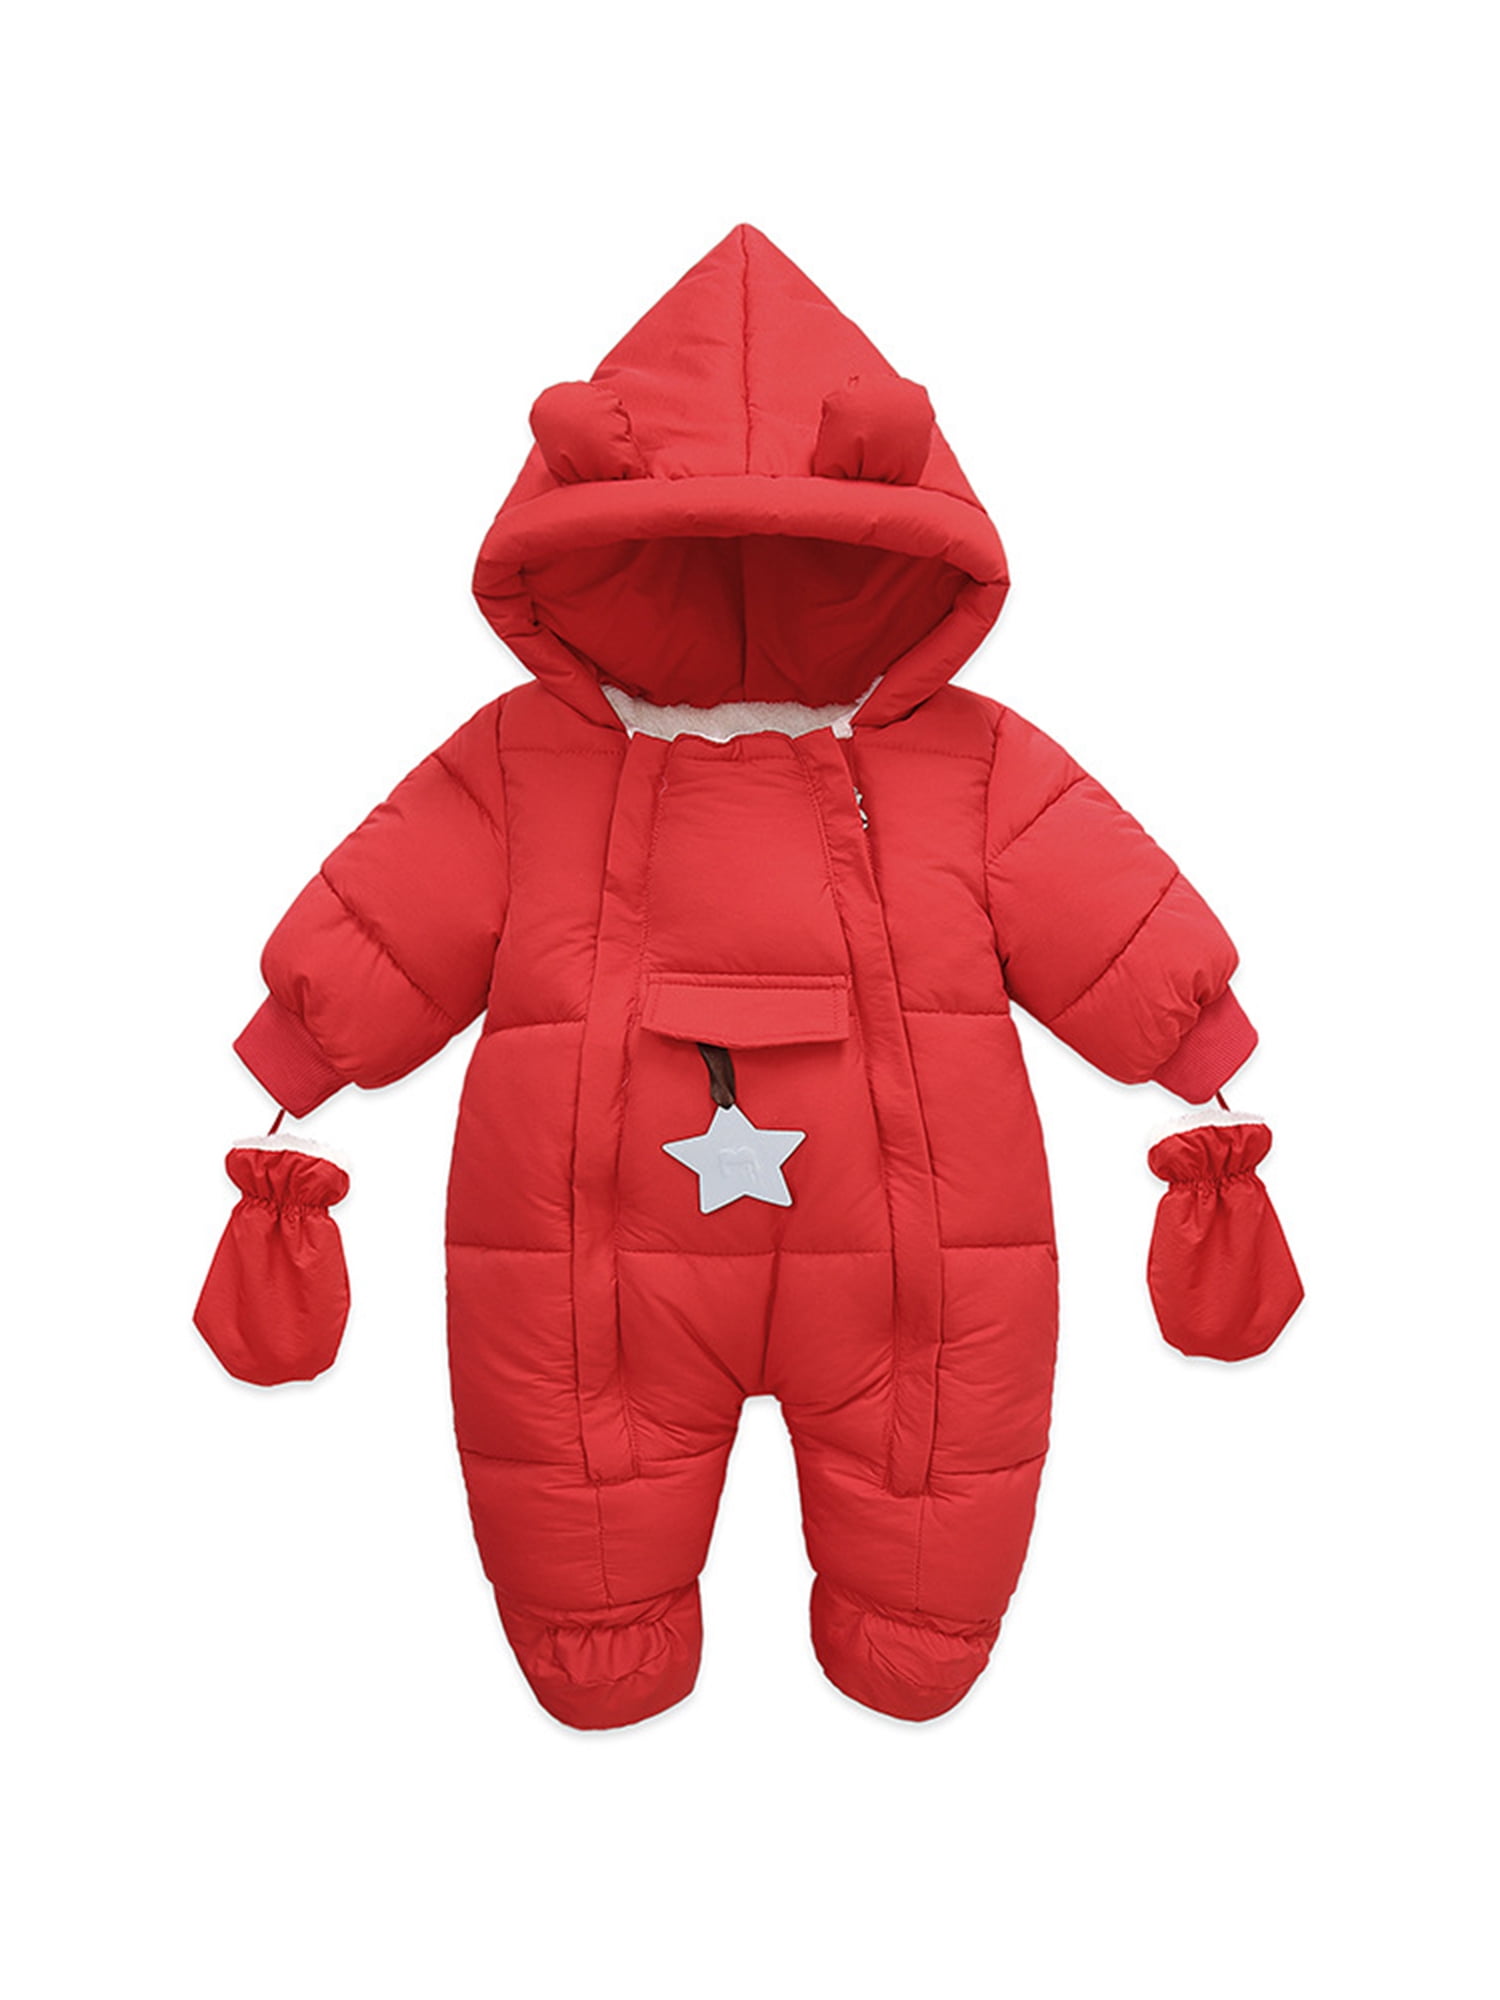 Baby Snowsuit with Booties Winter Rompers Hooded Warm Onesie Jumpsuit Outfits 9-12 Months